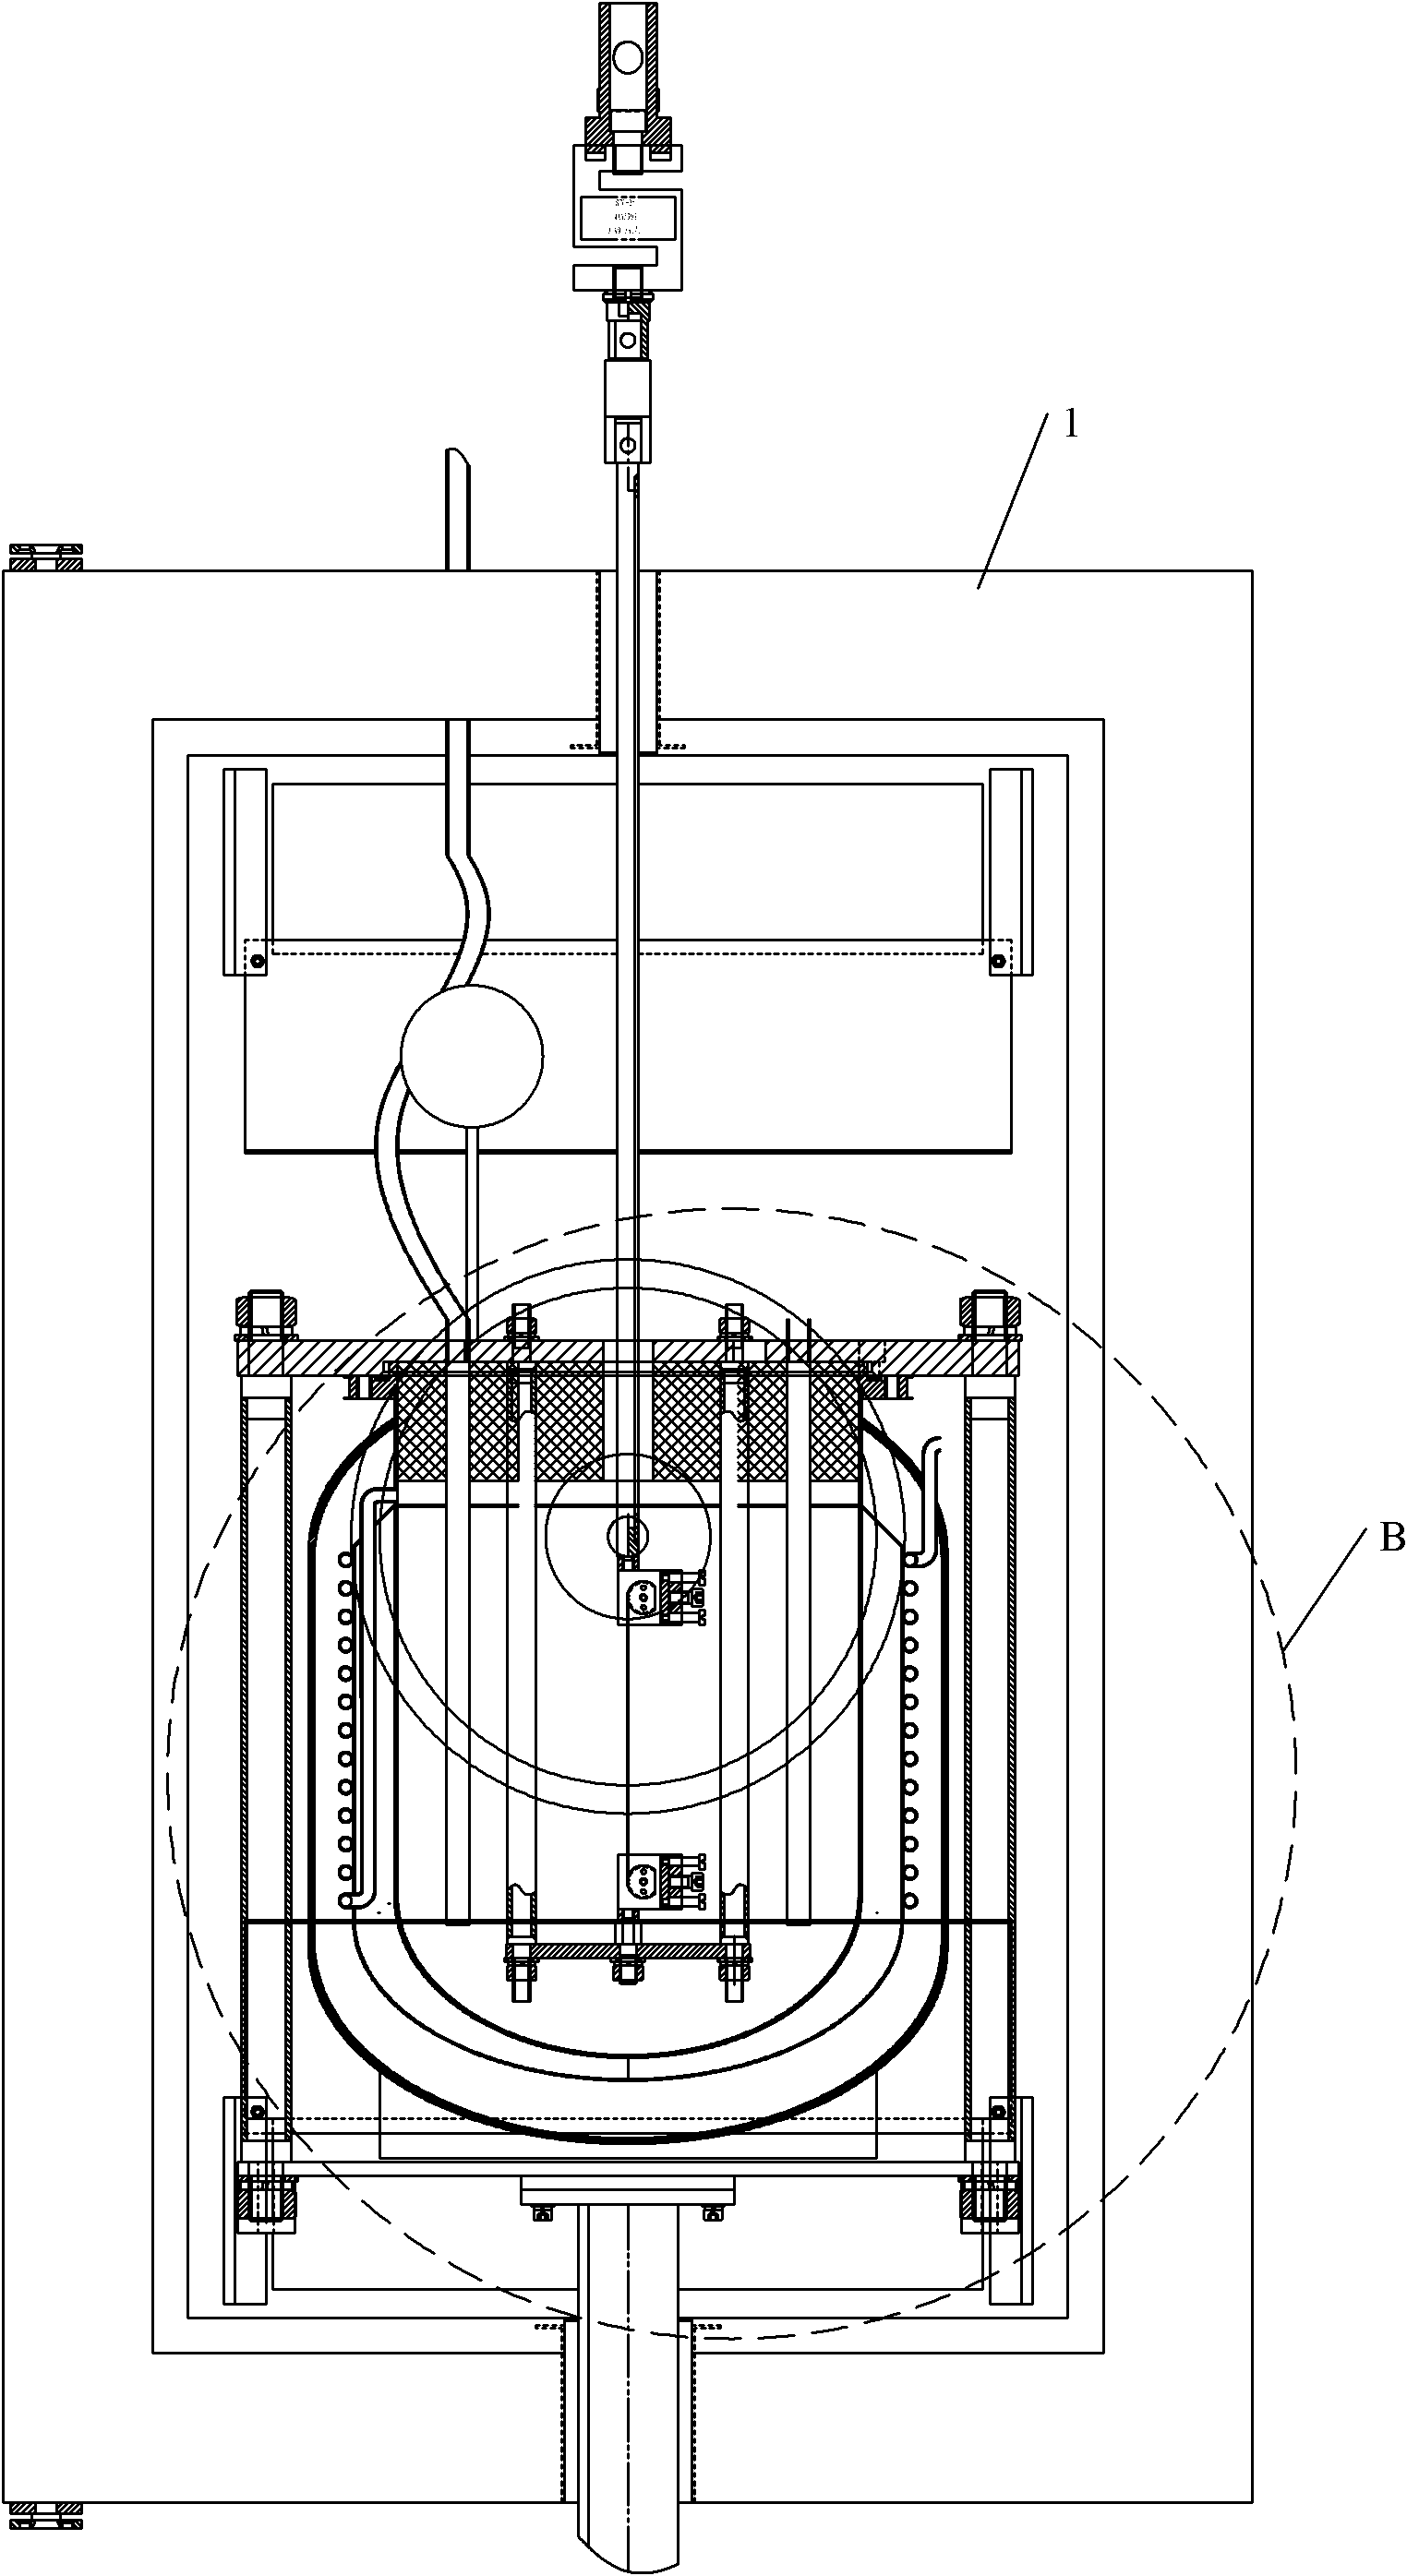 Multi-field coupling test system for superconducting material at temperature of between 373 and 4.2K